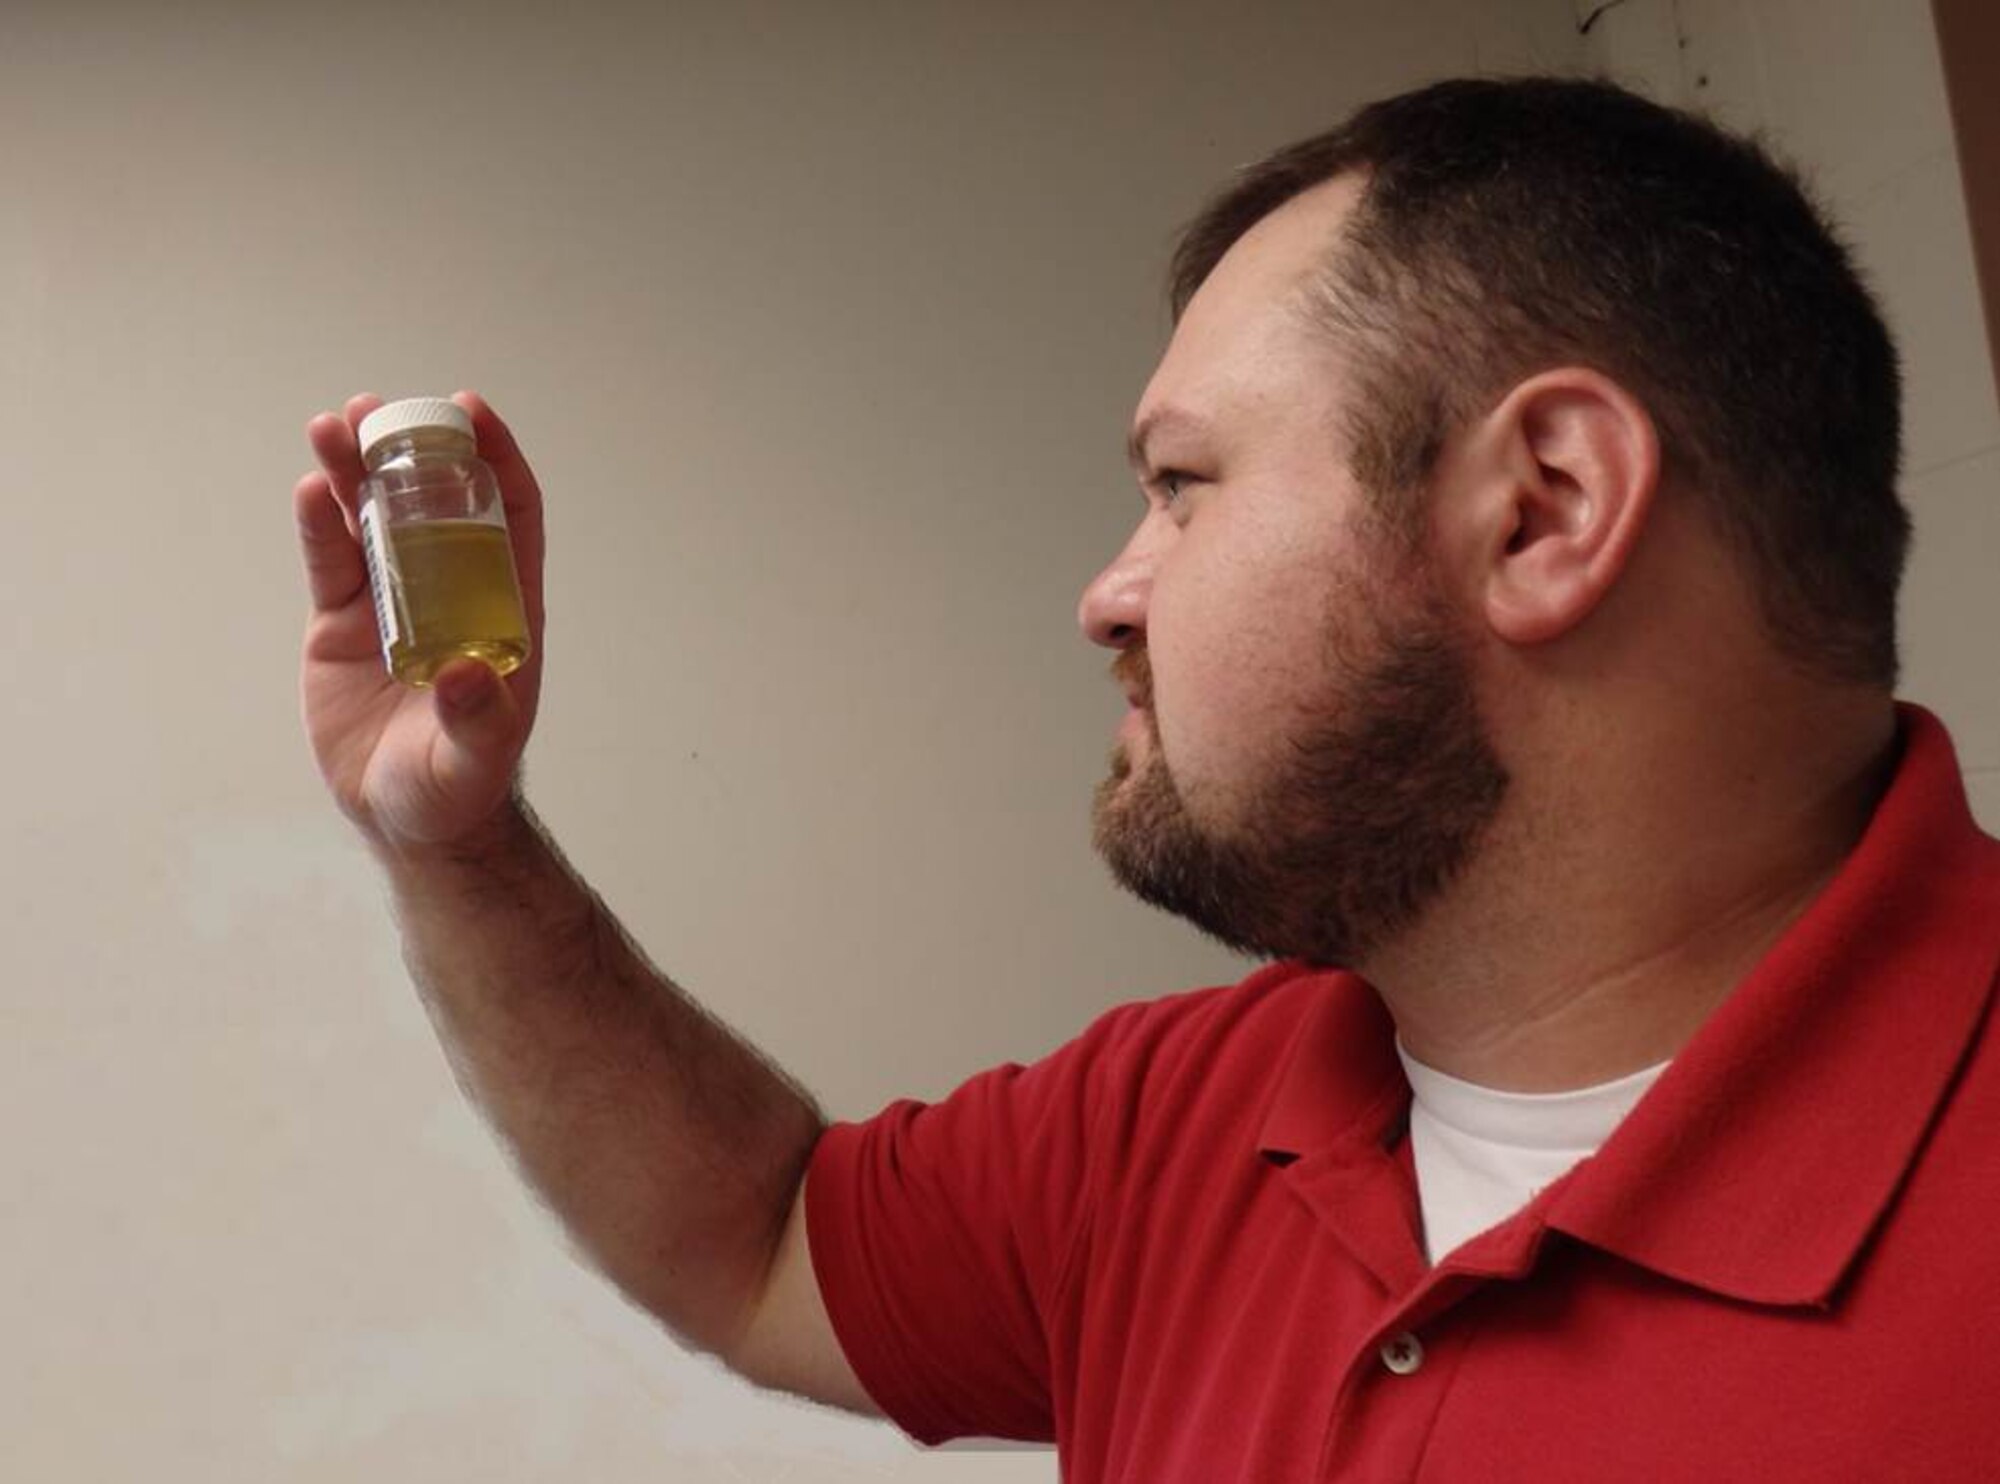 Casey Schewe, Oil Analysis/Processing Program lead, examines a sample of oil taken from a hydraulic unit. Preventative maintenance efforts like this are part of the Asset Health Assurance program at AEDC, which is a long-term reliability and maintenance program for the Test Operations and Sustainment contract. (AEDC photo)